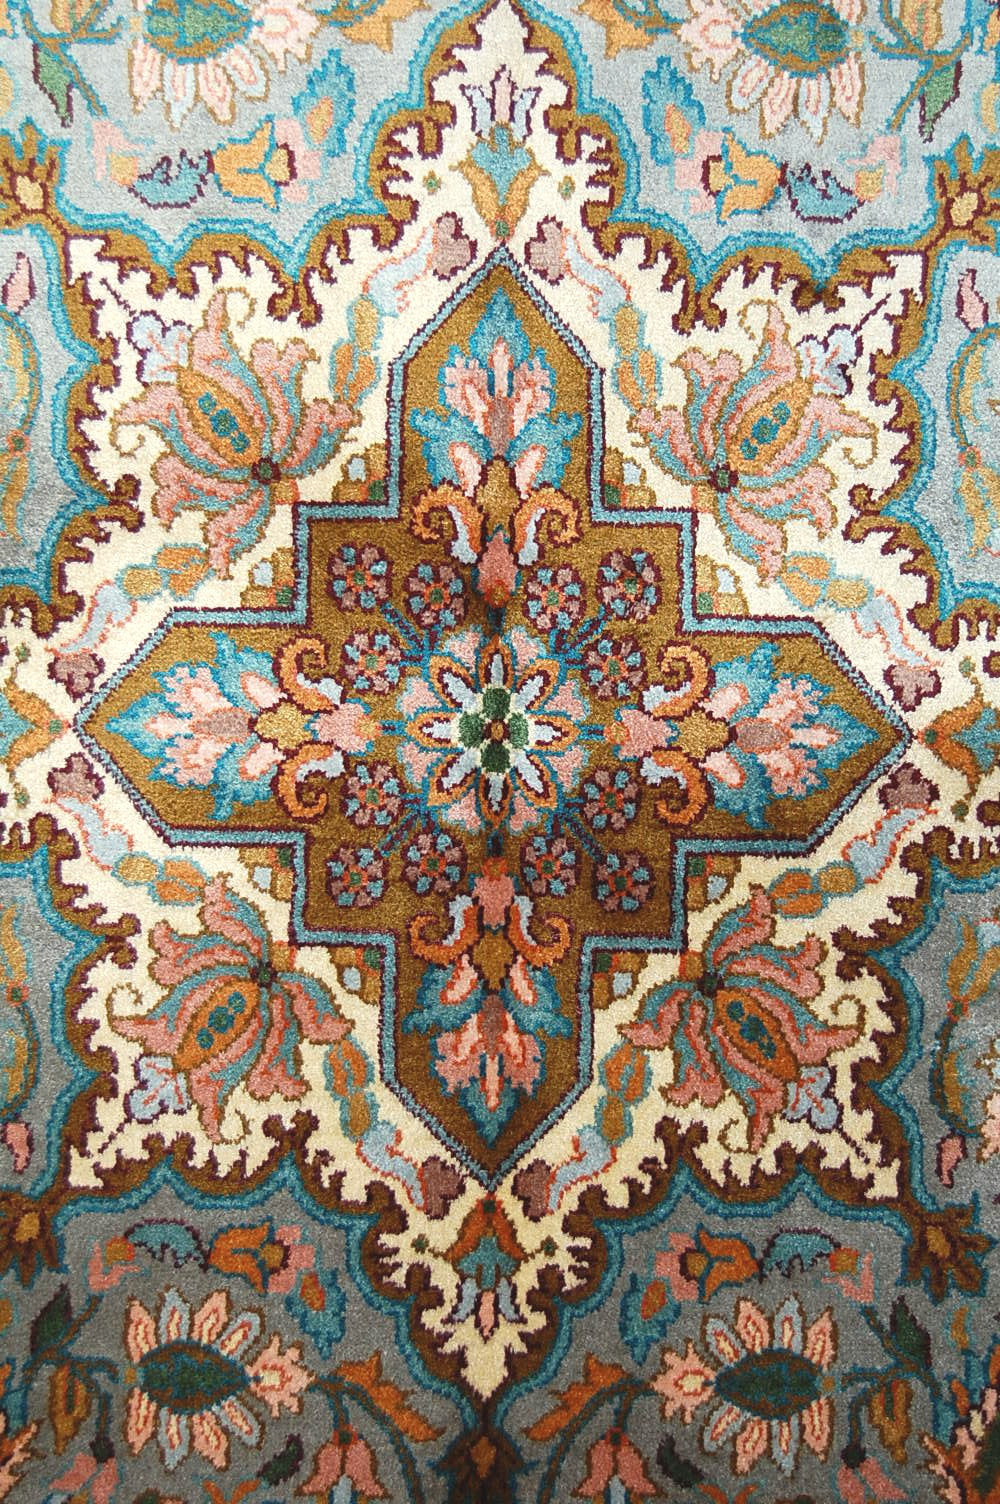 Kashmir Silk Carpet Hand Knotted, Turquoise 3'x5' #CPS15202